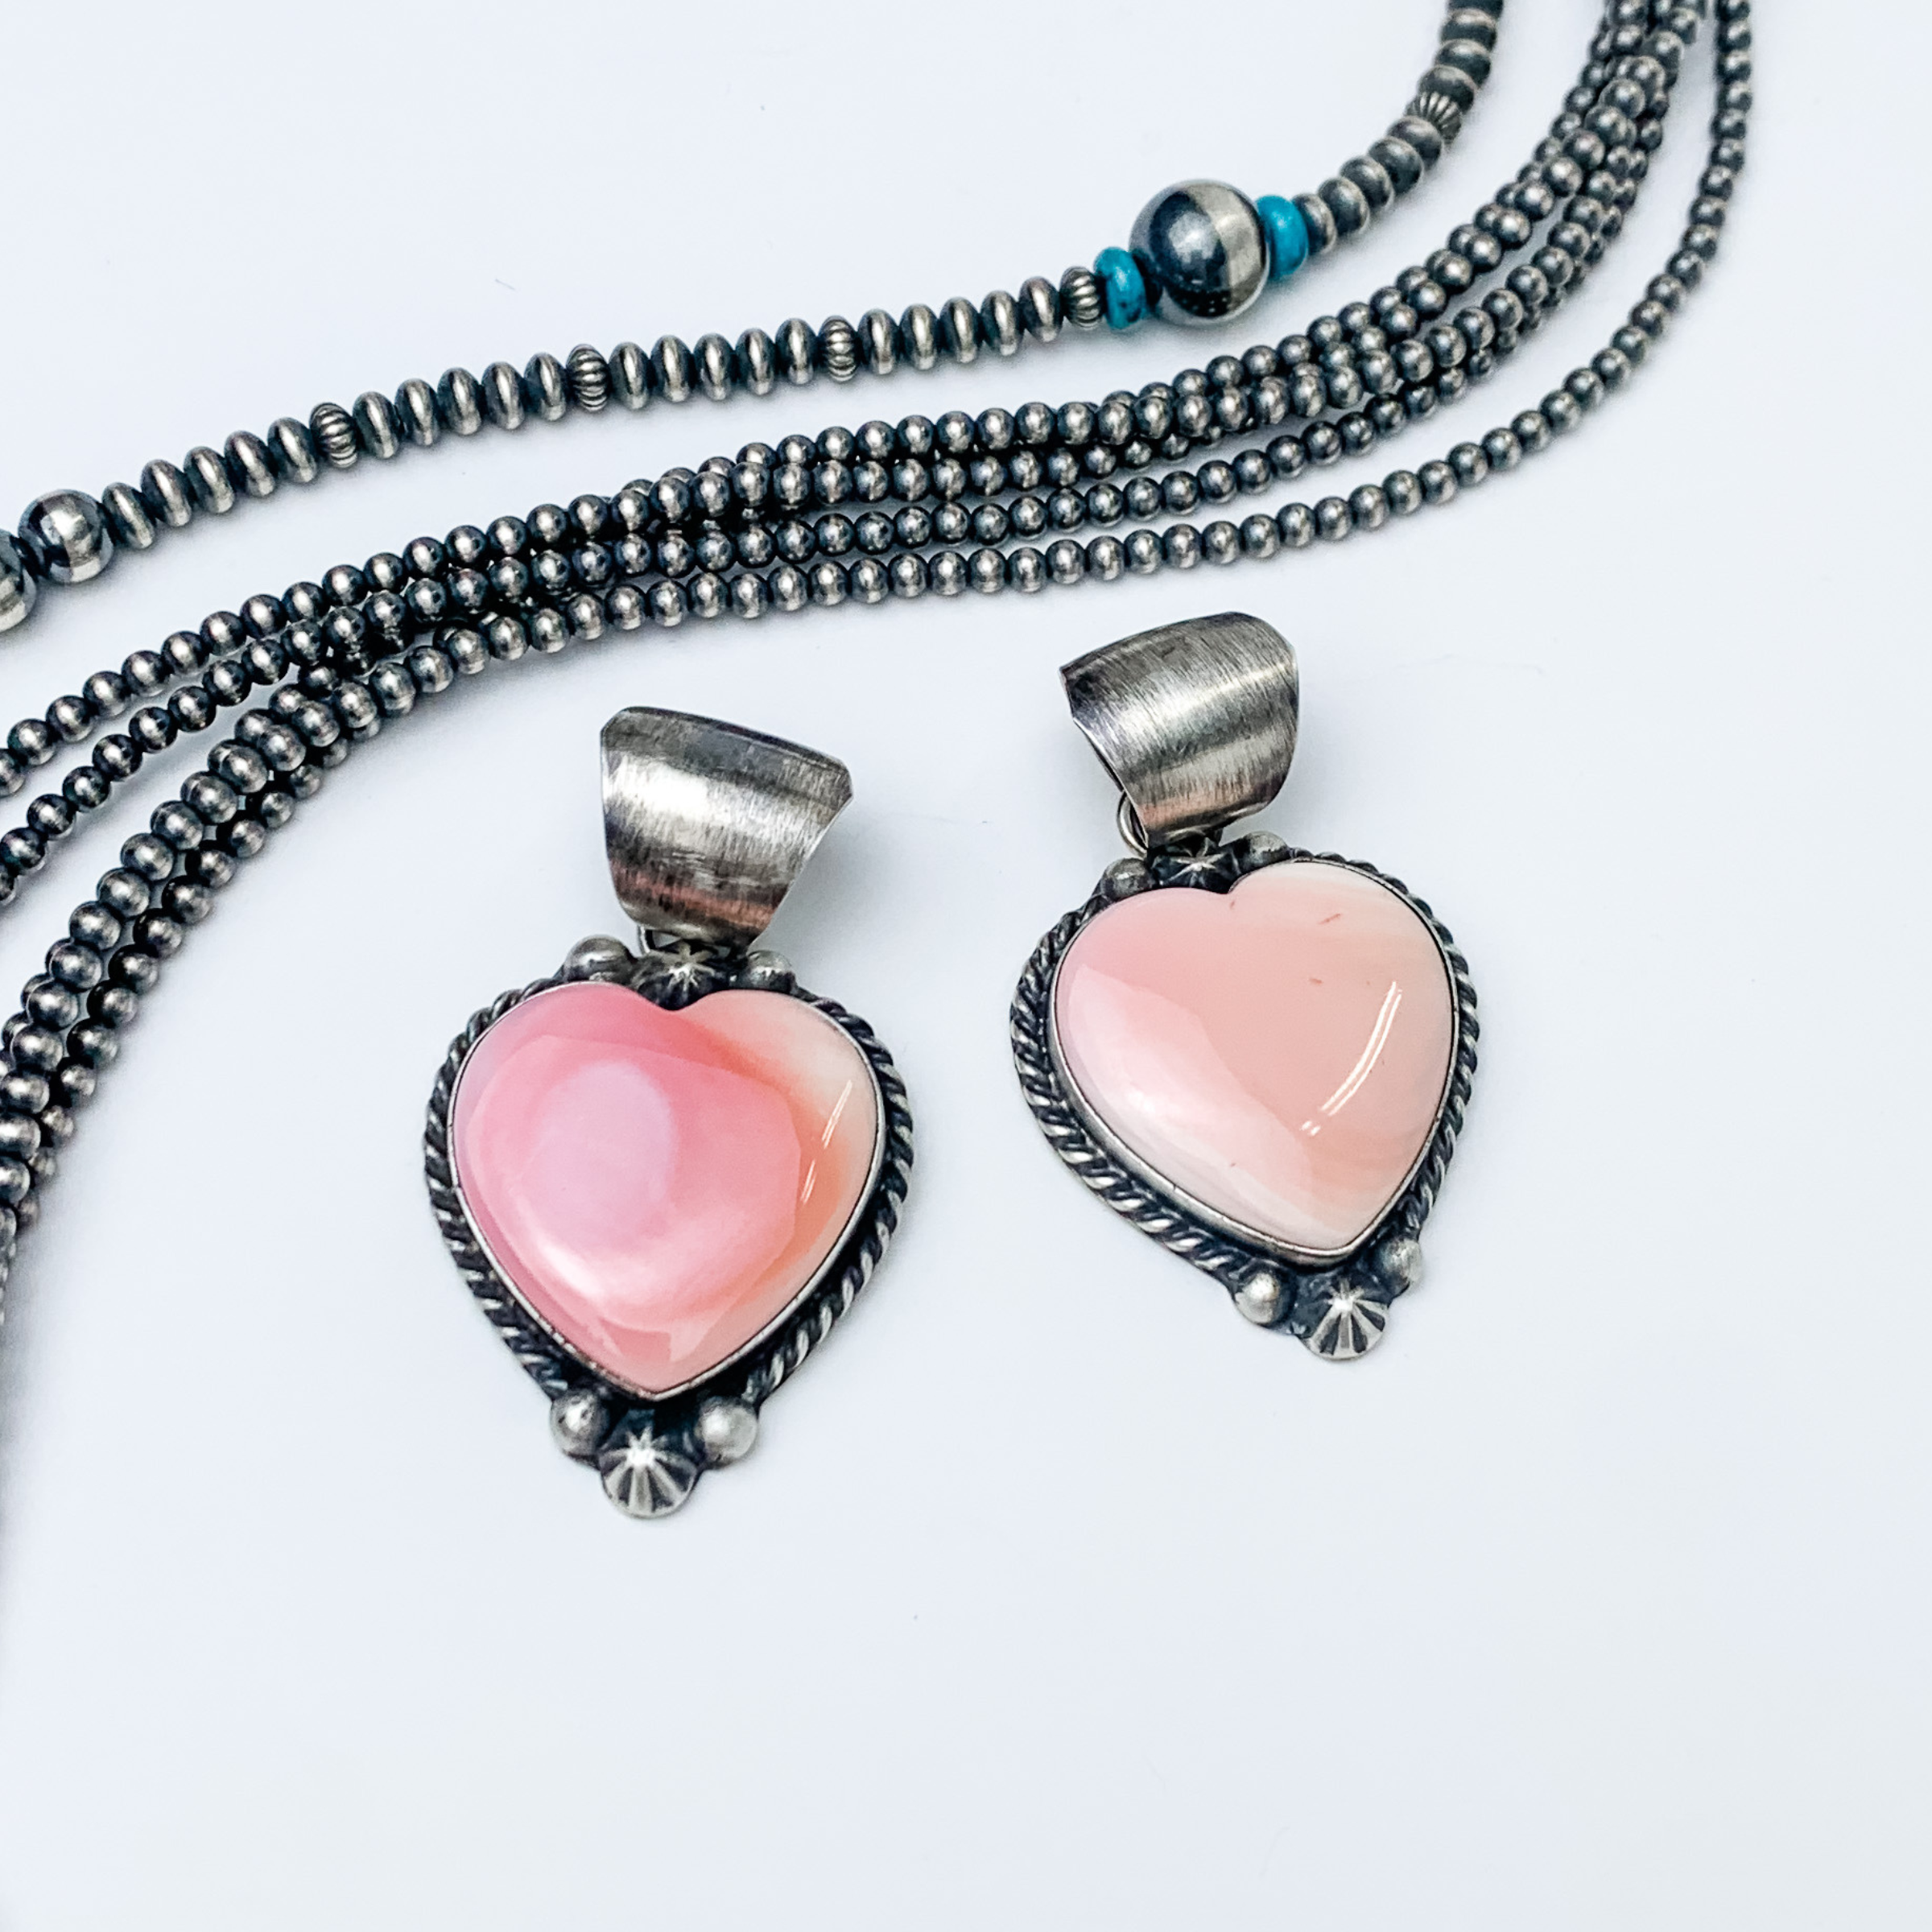 Pictured are two pink heart stone pendants with a silver outline and silver bail.  These pendants are pictured on a white background with silver beads above the pendant. 